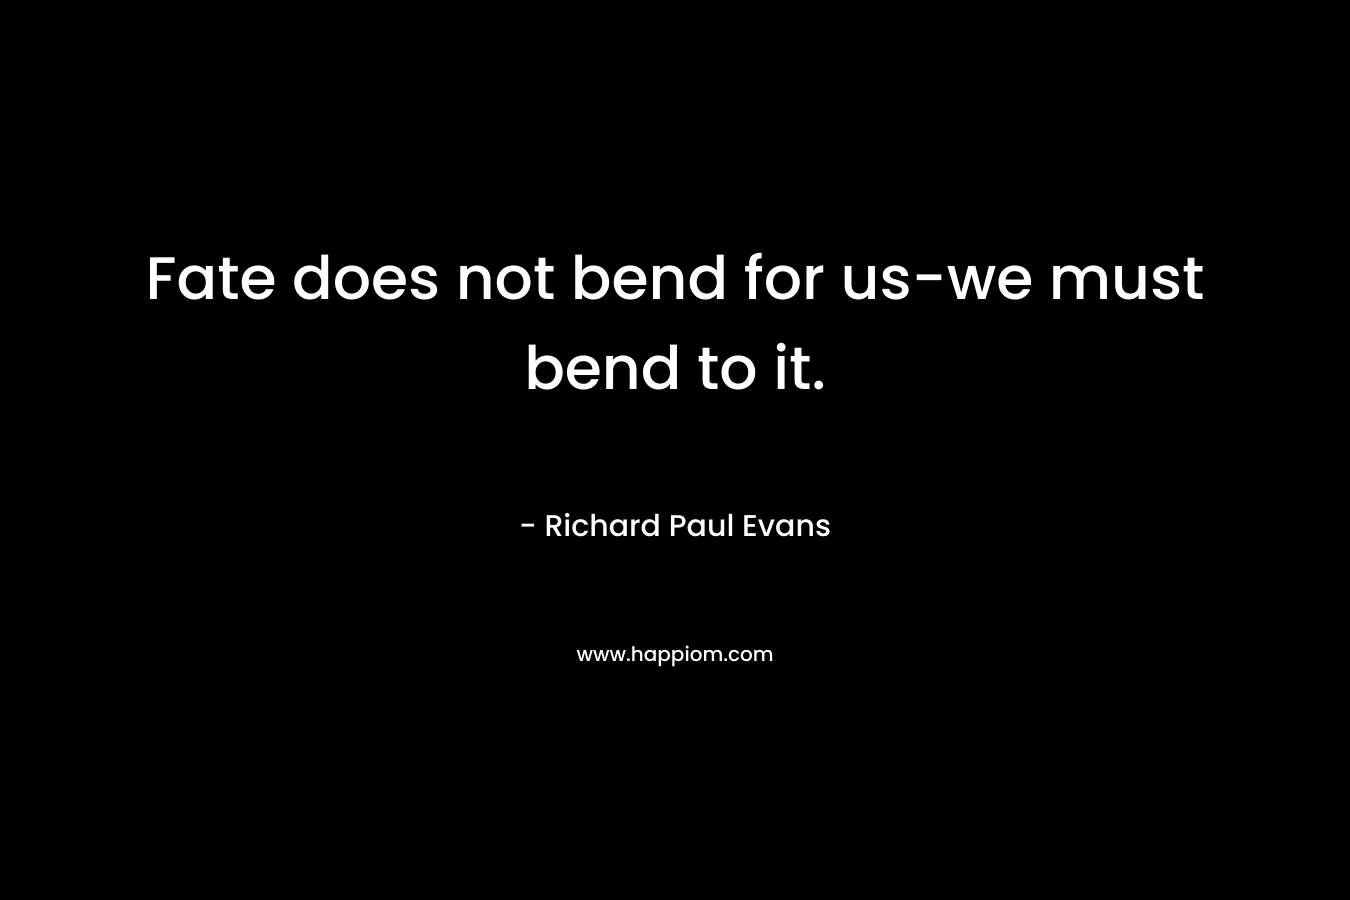 Fate does not bend for us-we must bend to it. – Richard Paul Evans